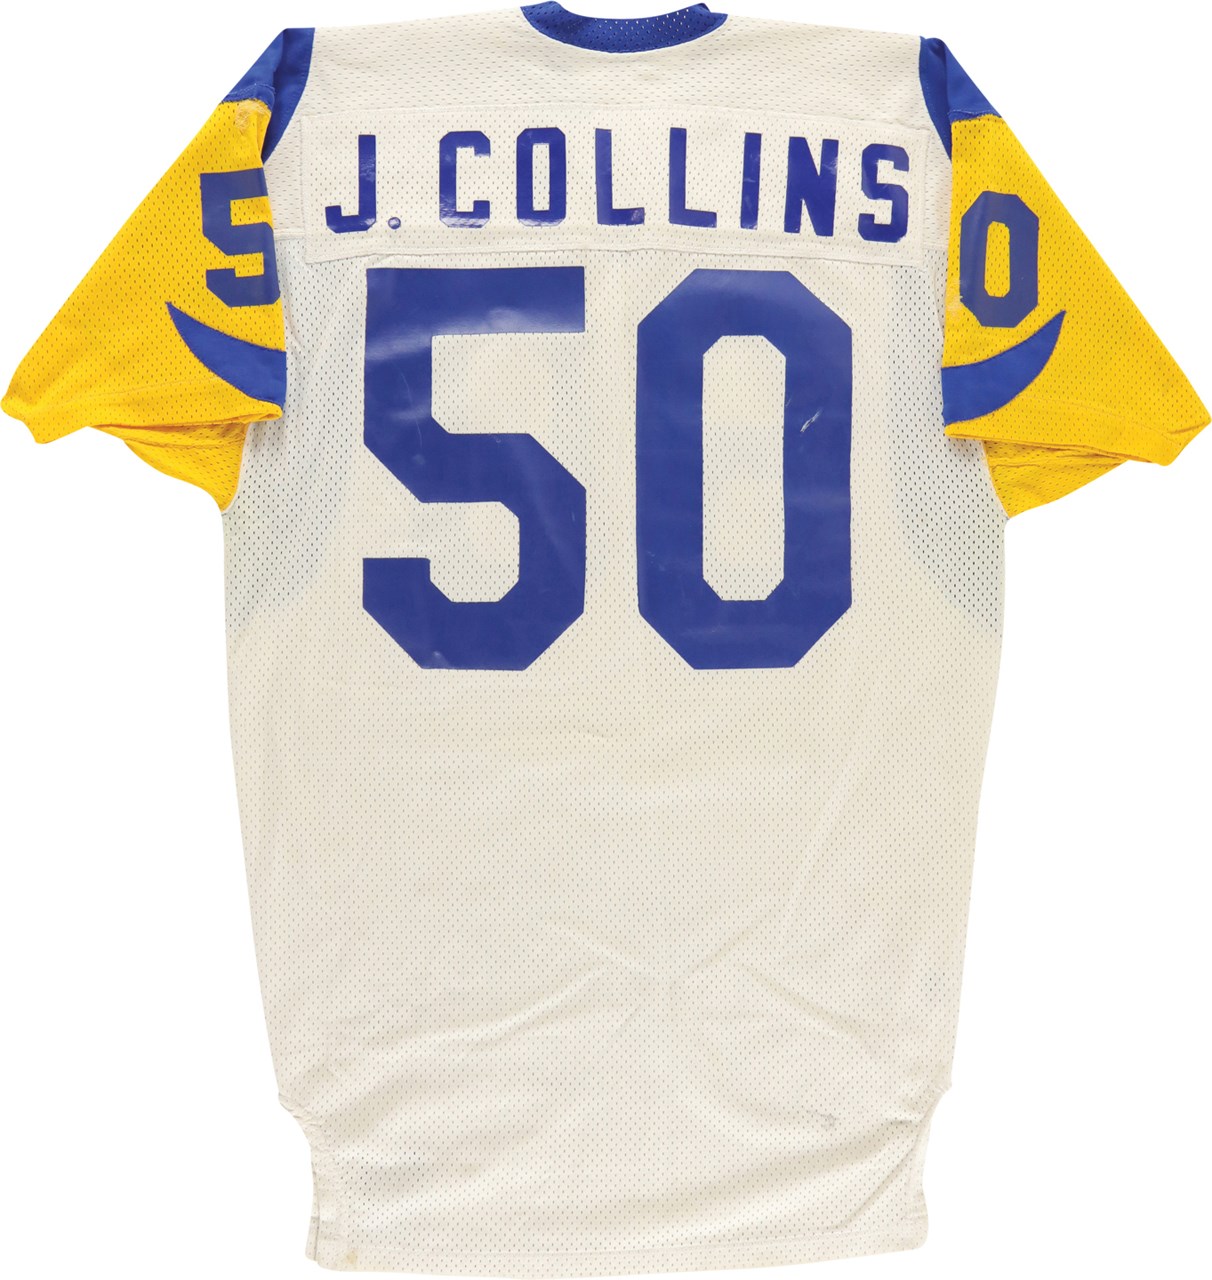 Football - 1983 Jim Collins Los Angeles Rams Game Worn Jersey (Photo-Matched to 1984 Topps Card)